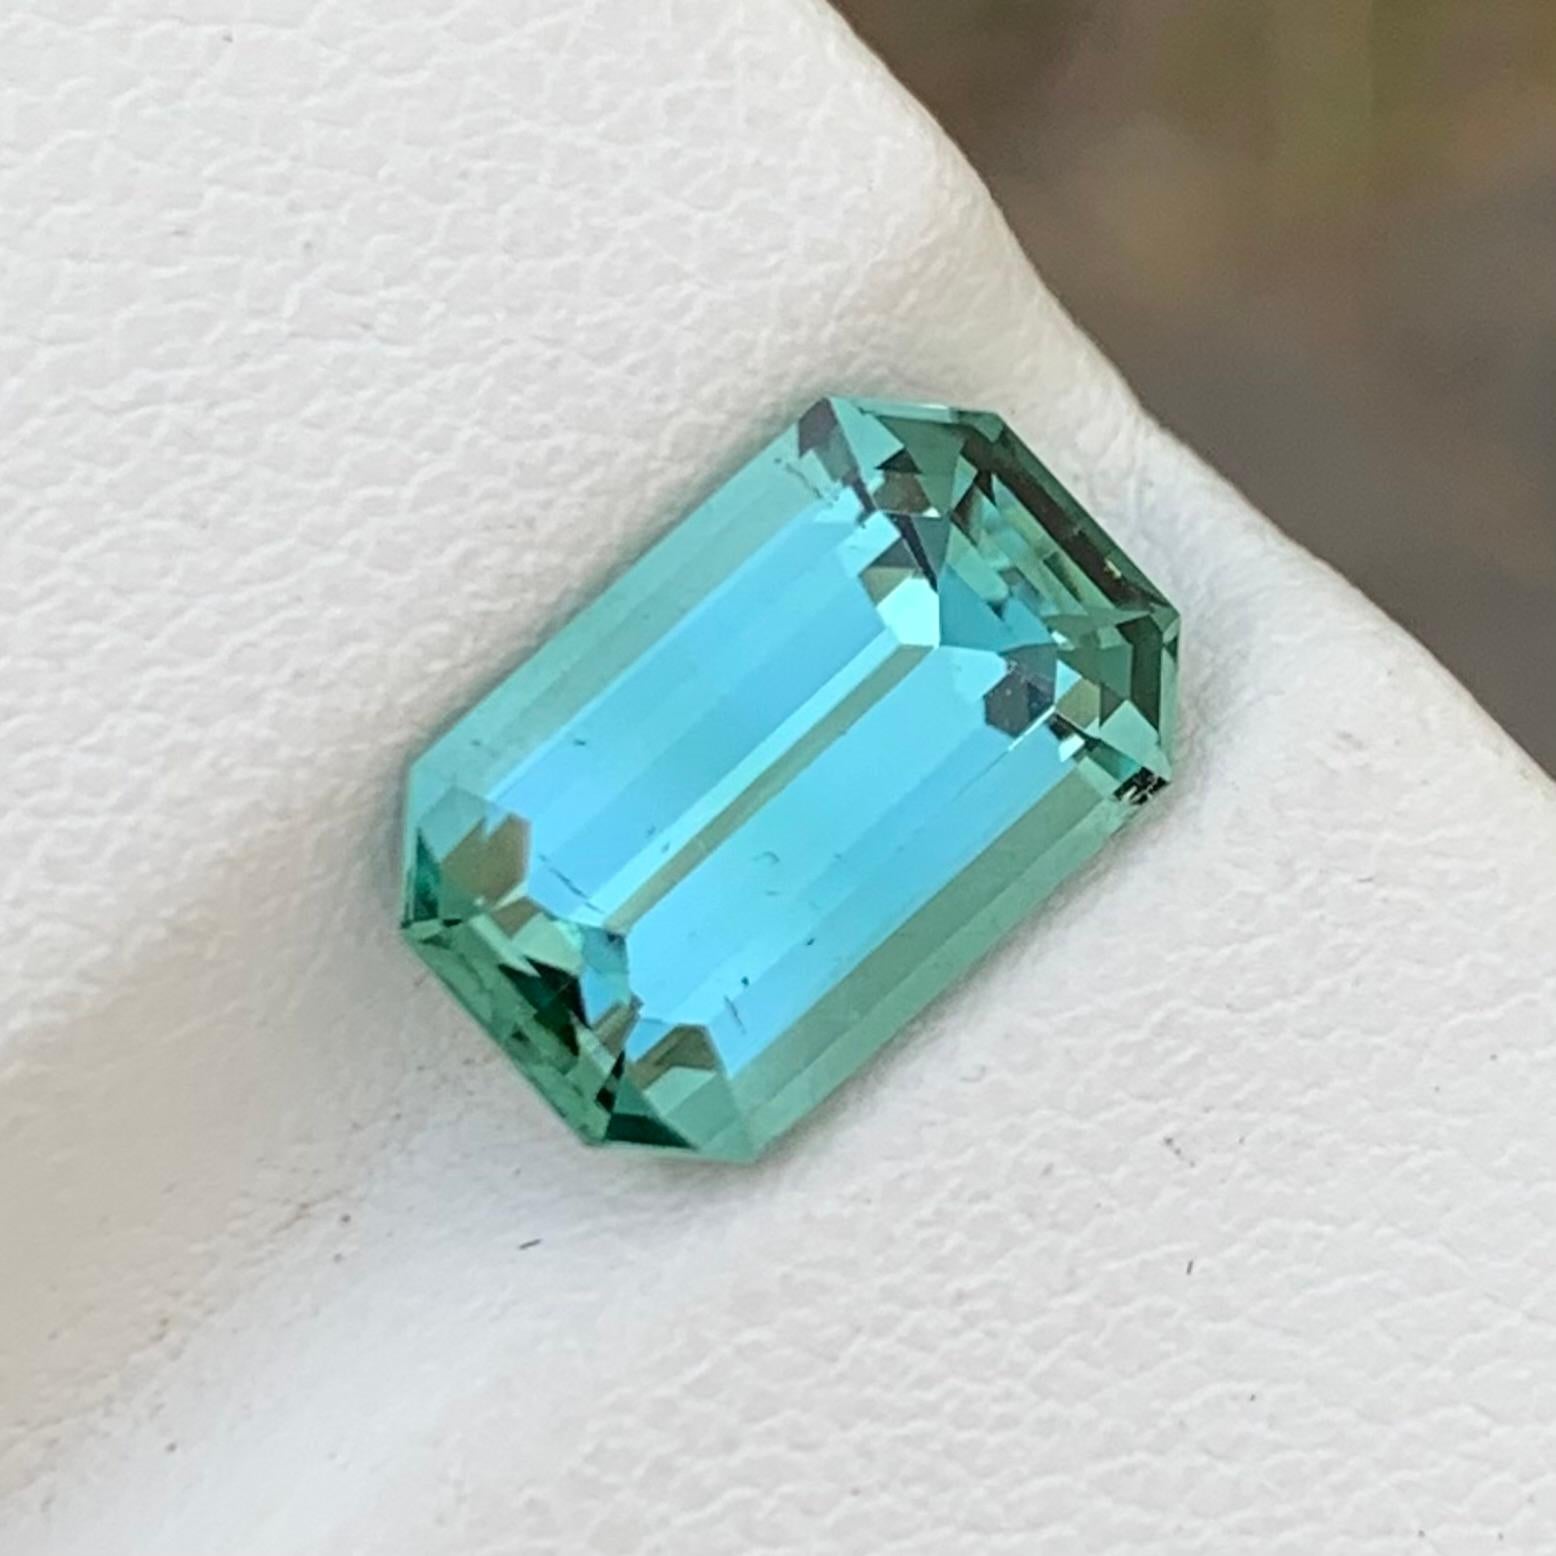 Loose Mint Tourmaline
Weight: 3.40 Carats
Dimension: 11.1 x 7.3 x 5.1 Mm
Colour: Mint Green
Shape: Emerald
Treatment: None
Certificate: On Demand

Mint green tourmaline, a variety of the mineral tourmaline, captivates with its refreshing and